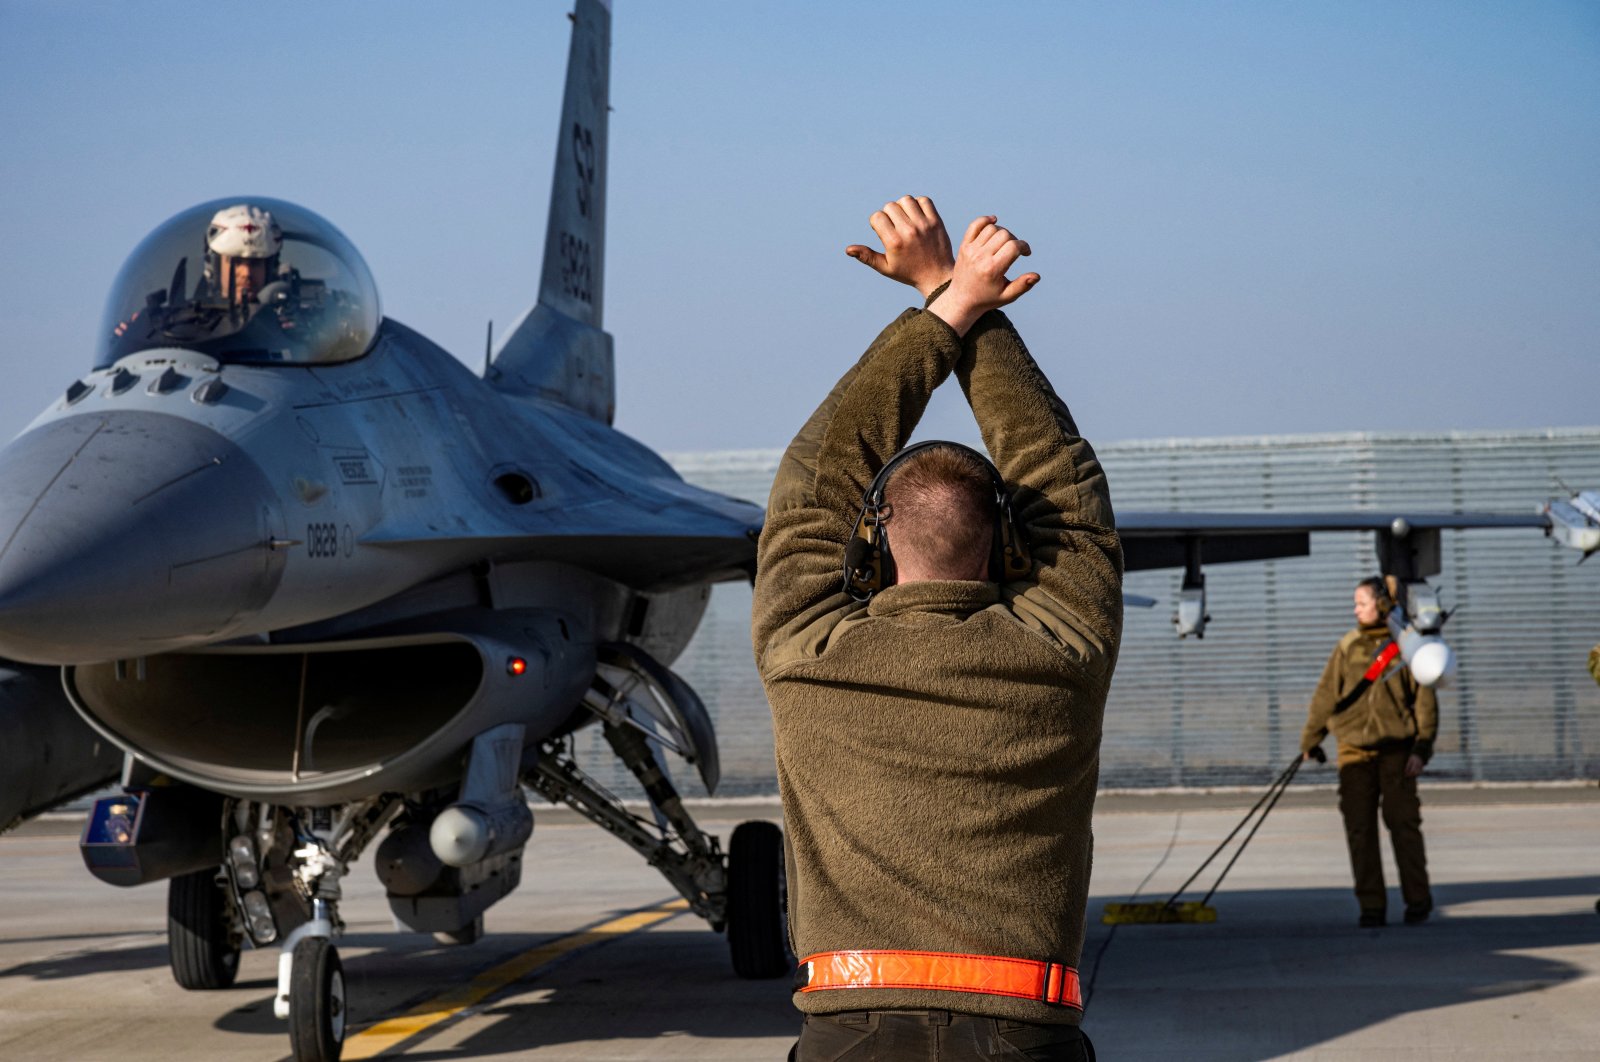 A U.S. Air Force airman marshals an F-16 Fighting Falcon aircraft assigned to the 480th Fighter Squadron, at the 86th Air Base near Fetesti, Romania, Feb. 17, 2022. (Reuters Photo)